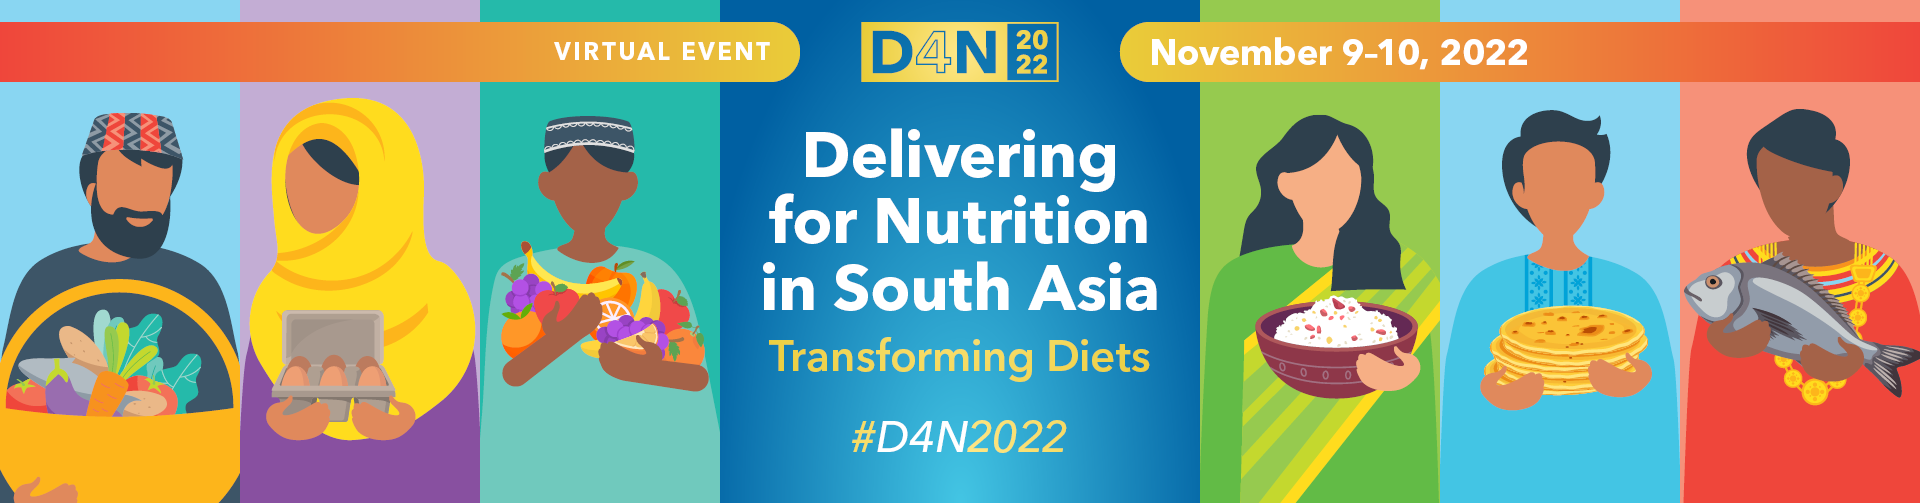 Delivering for Nutrition in South Asia: Transforming Diets Day One